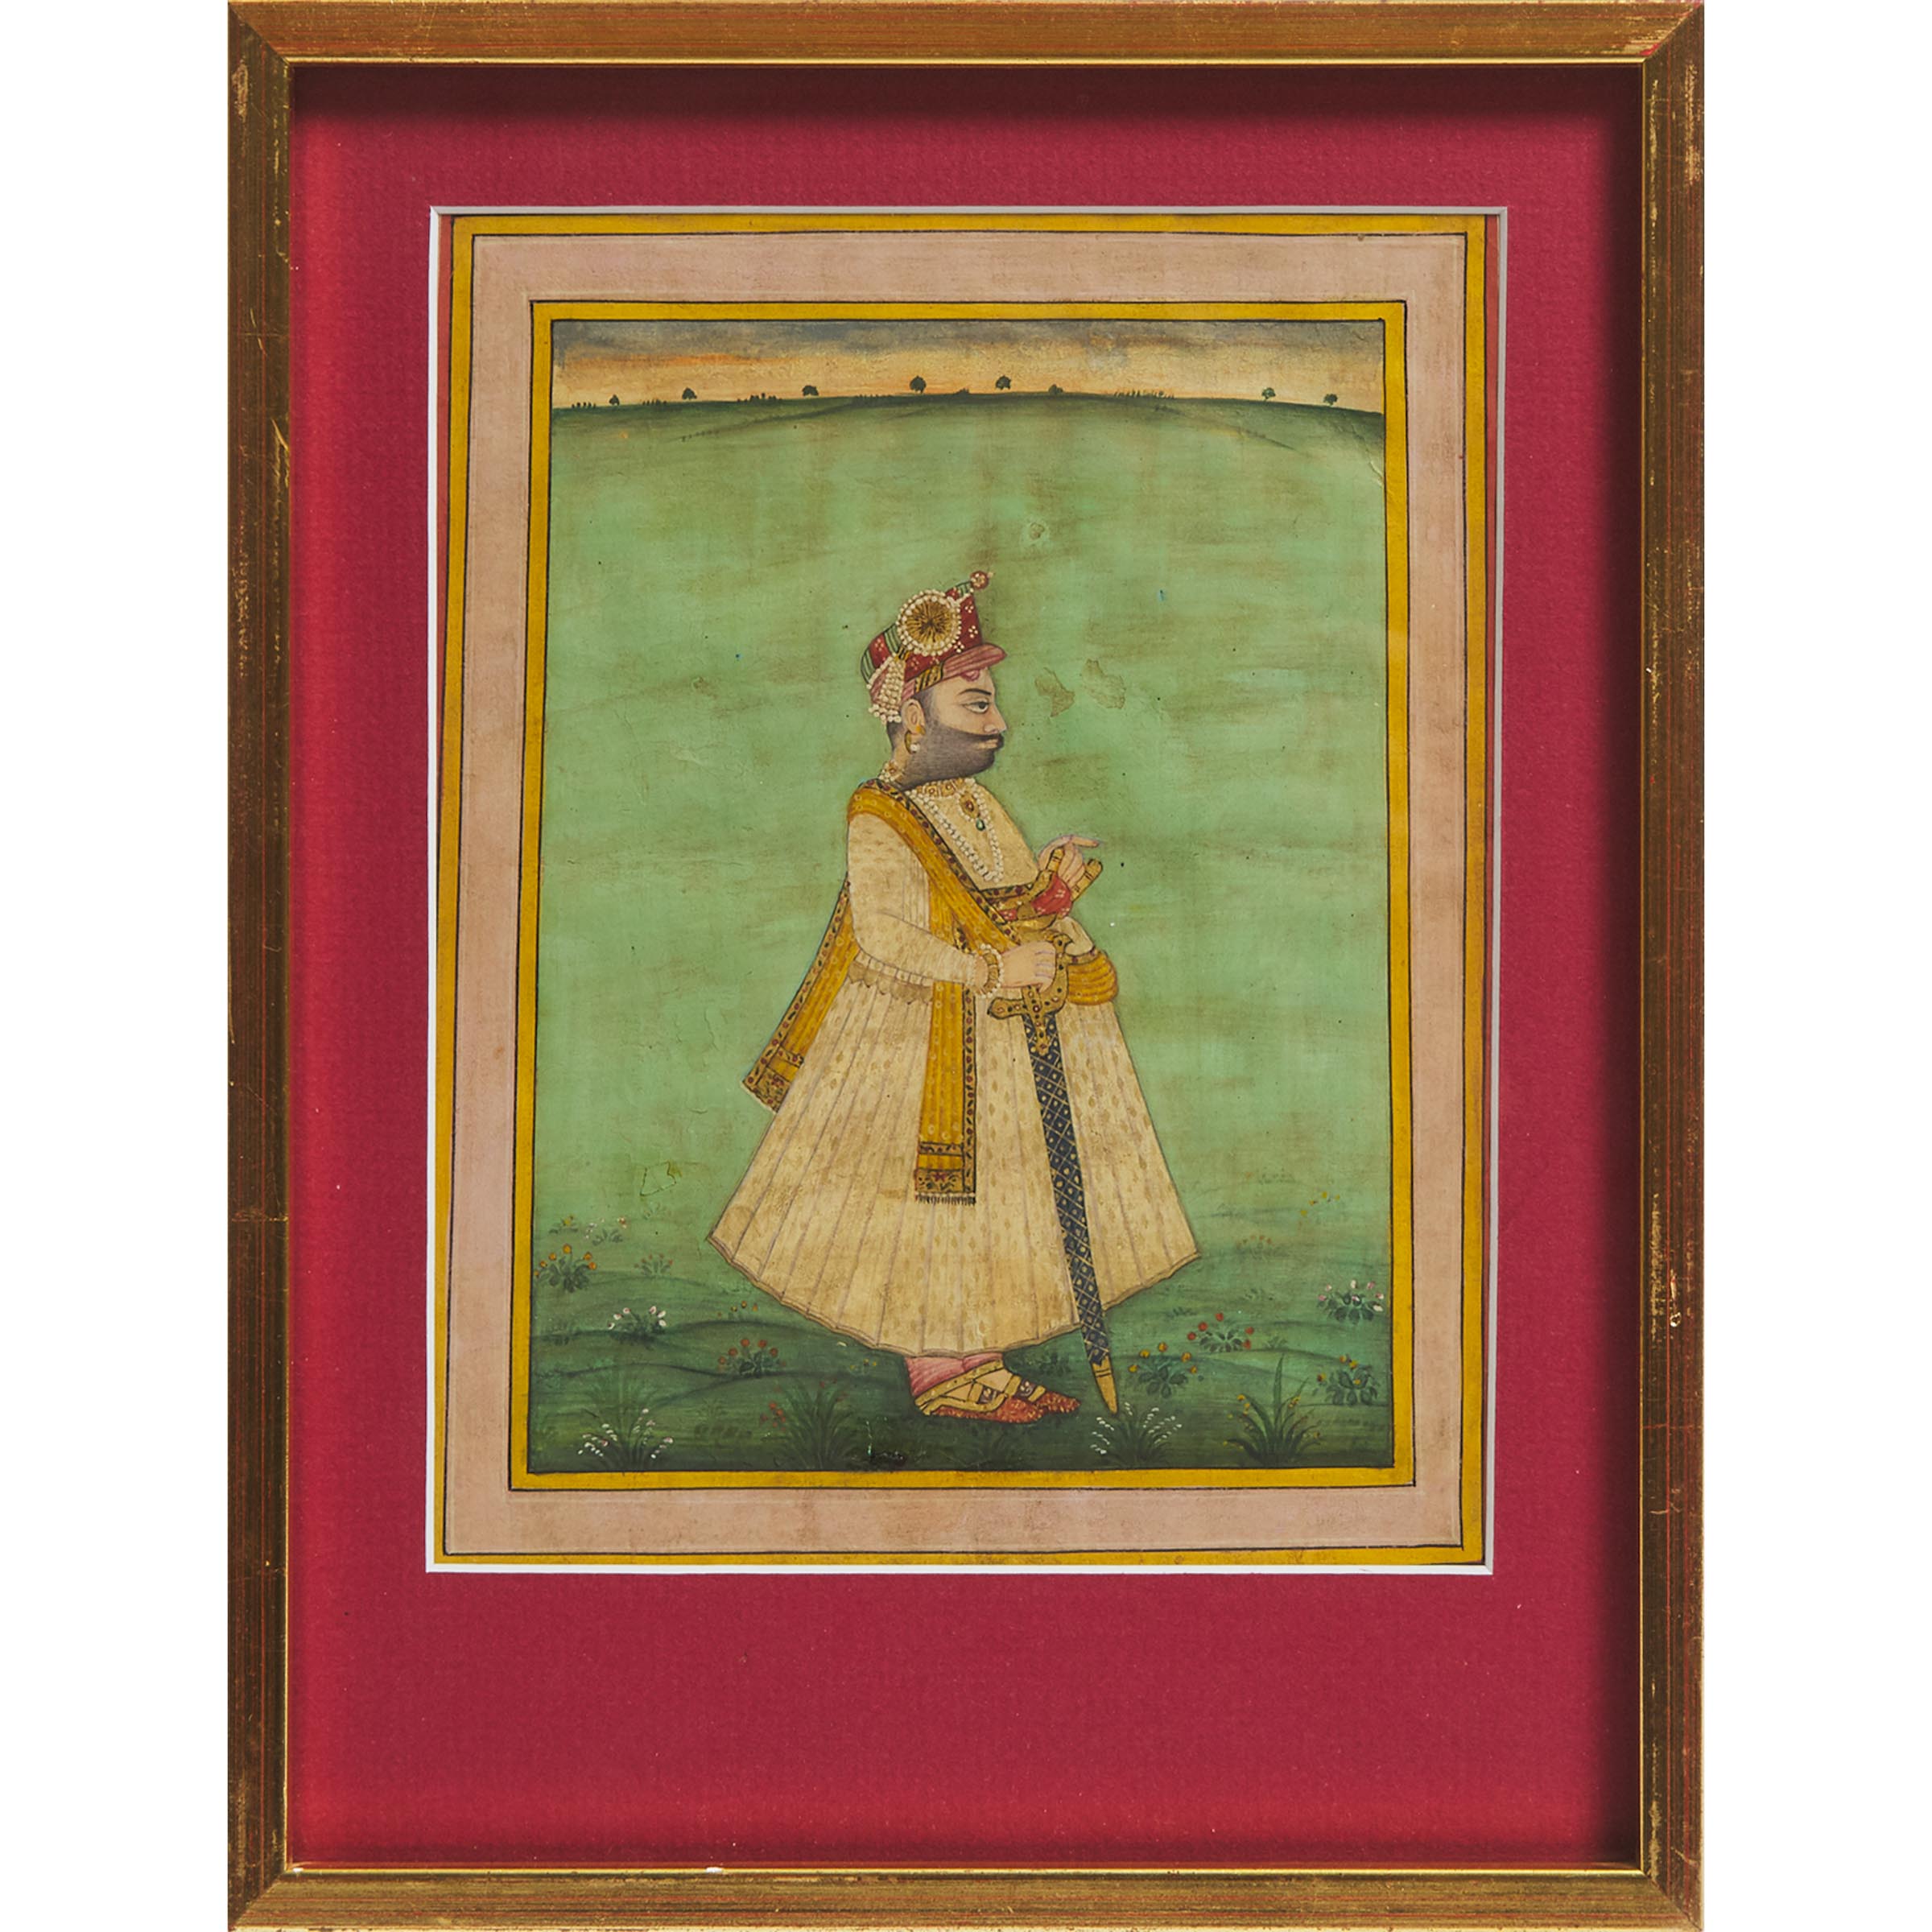 An Indian Miniature Painting of a Mughal Prince, 19th Century